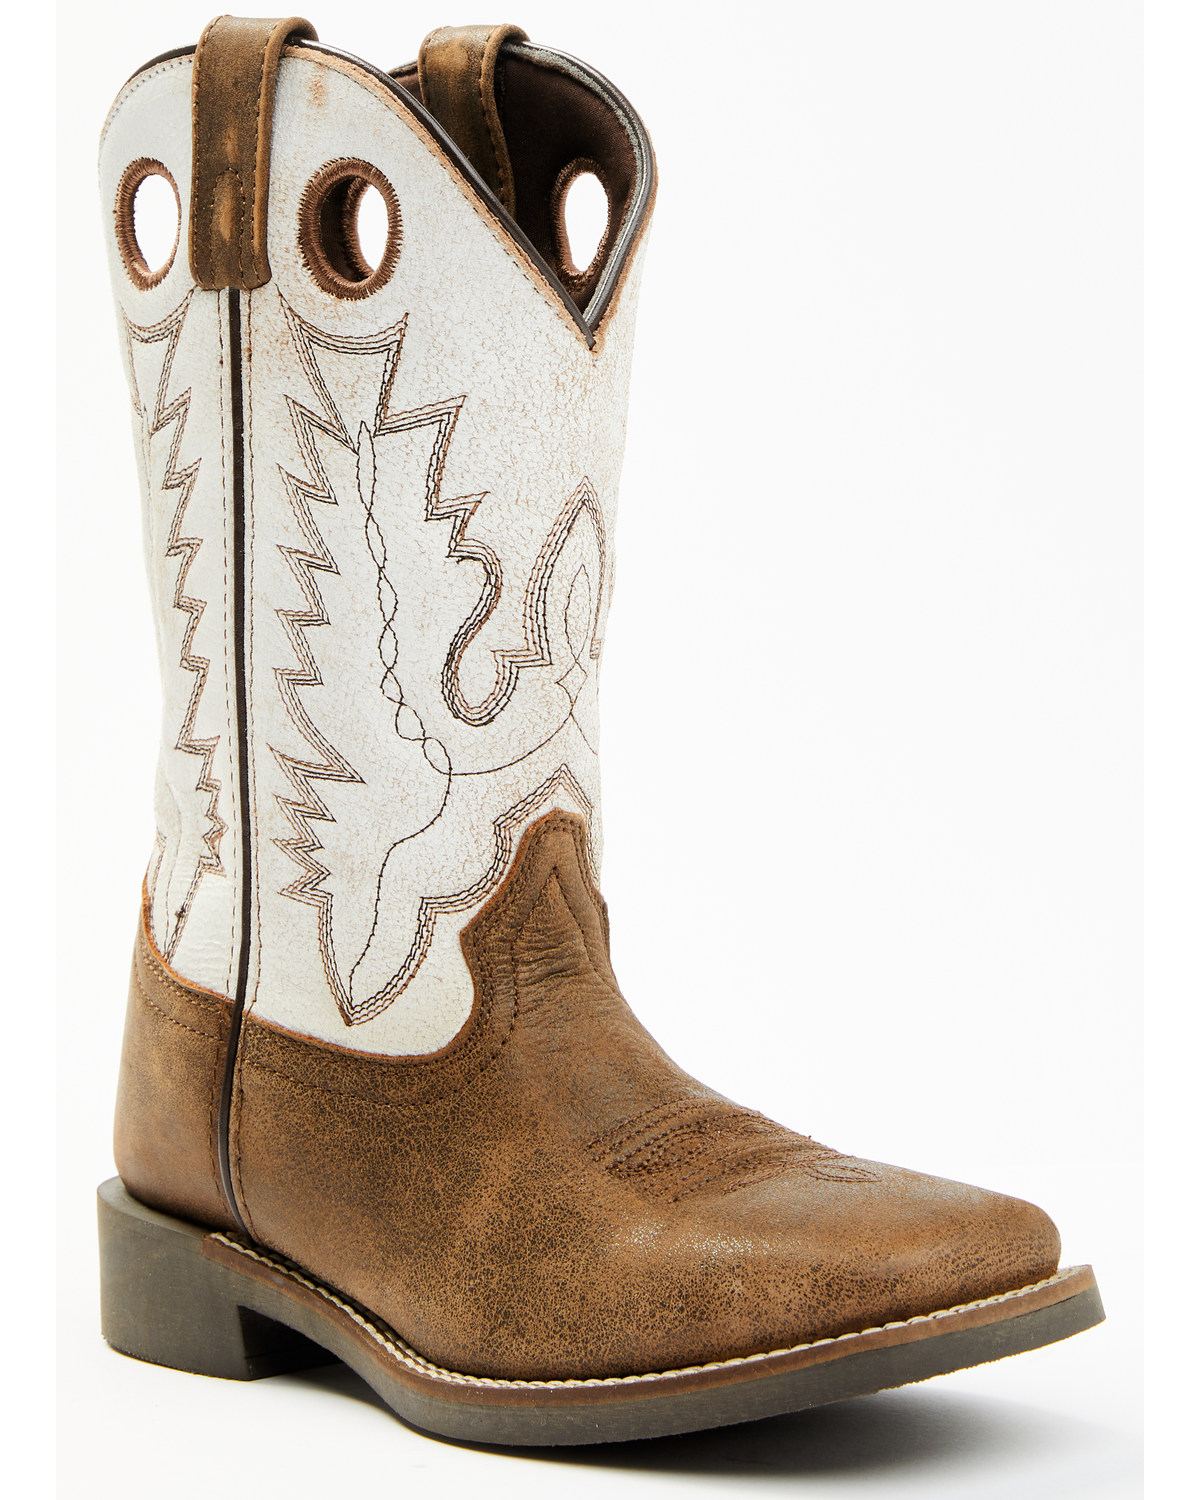 Cody James Boys' Pull On Leather Western Boots - Broad Square Toe